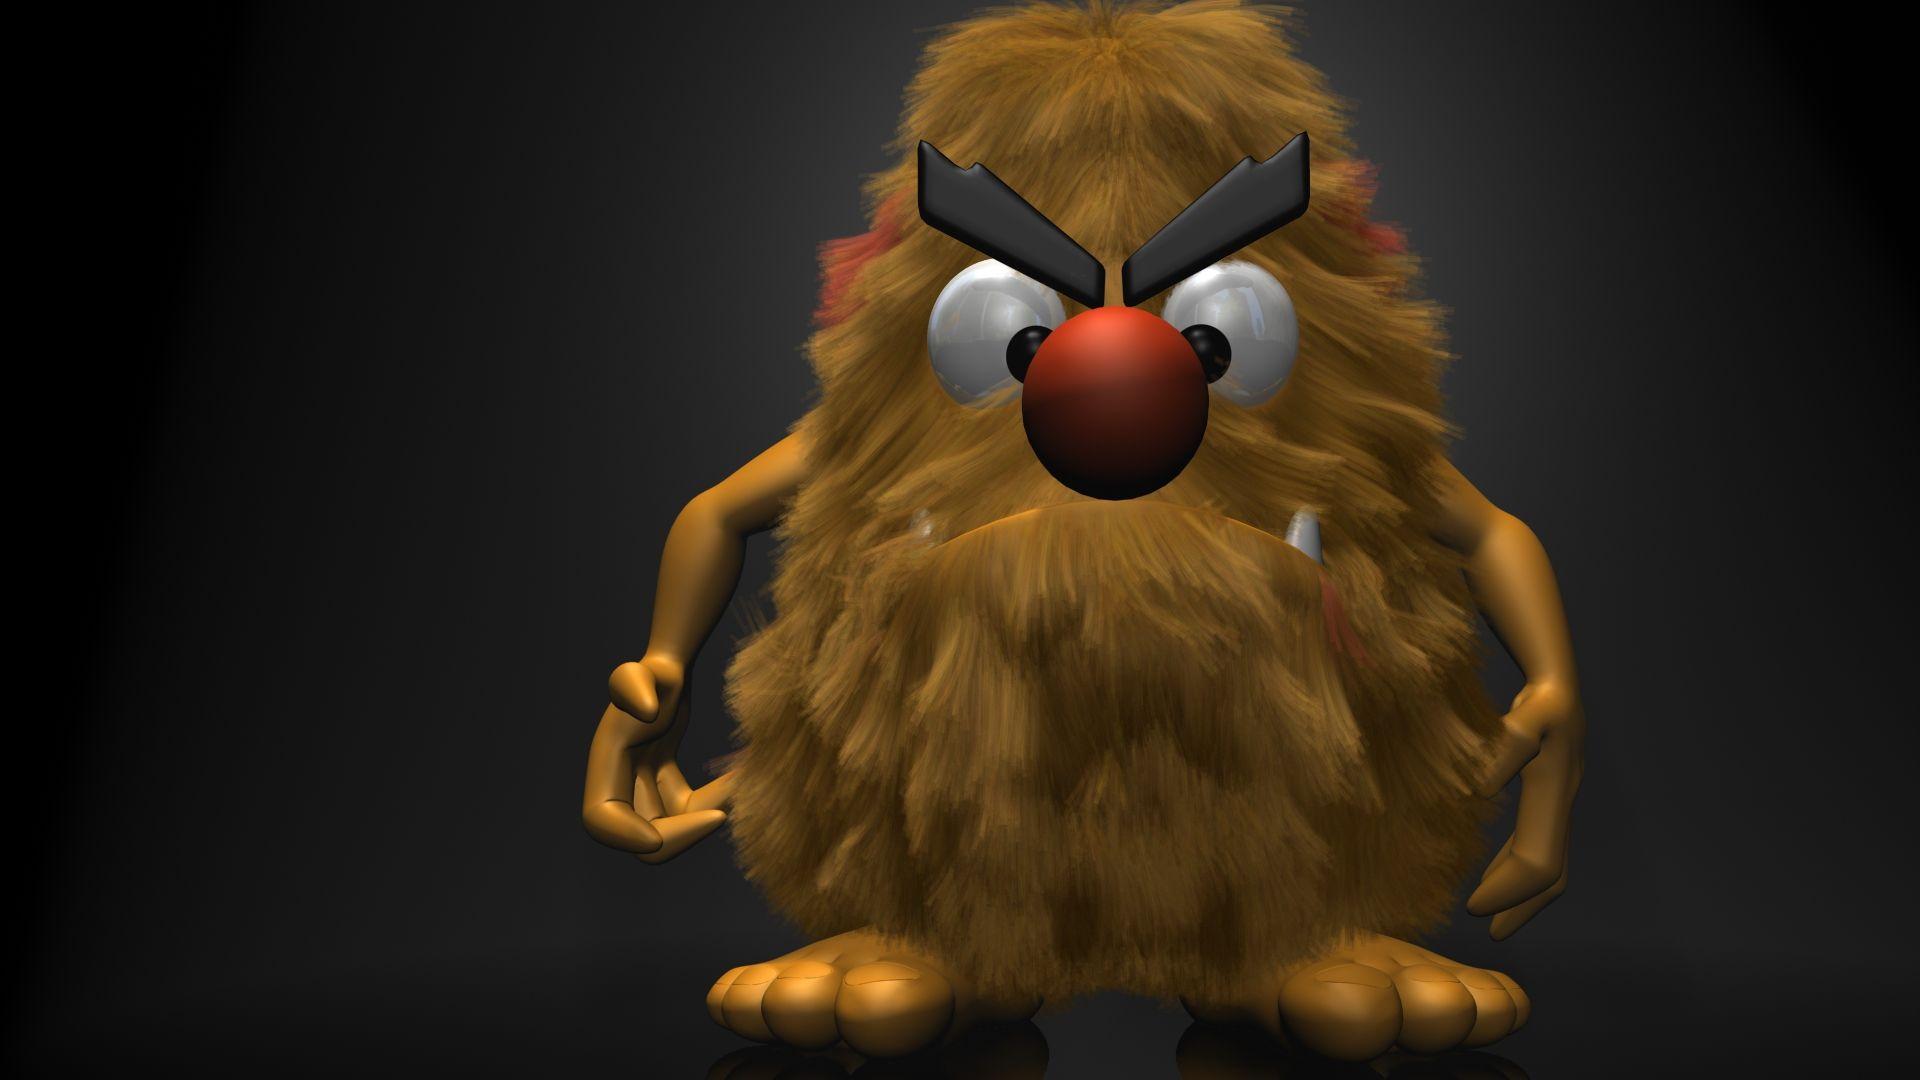 Hairy Monster Full HD Wallpaper and Background Imagex1080